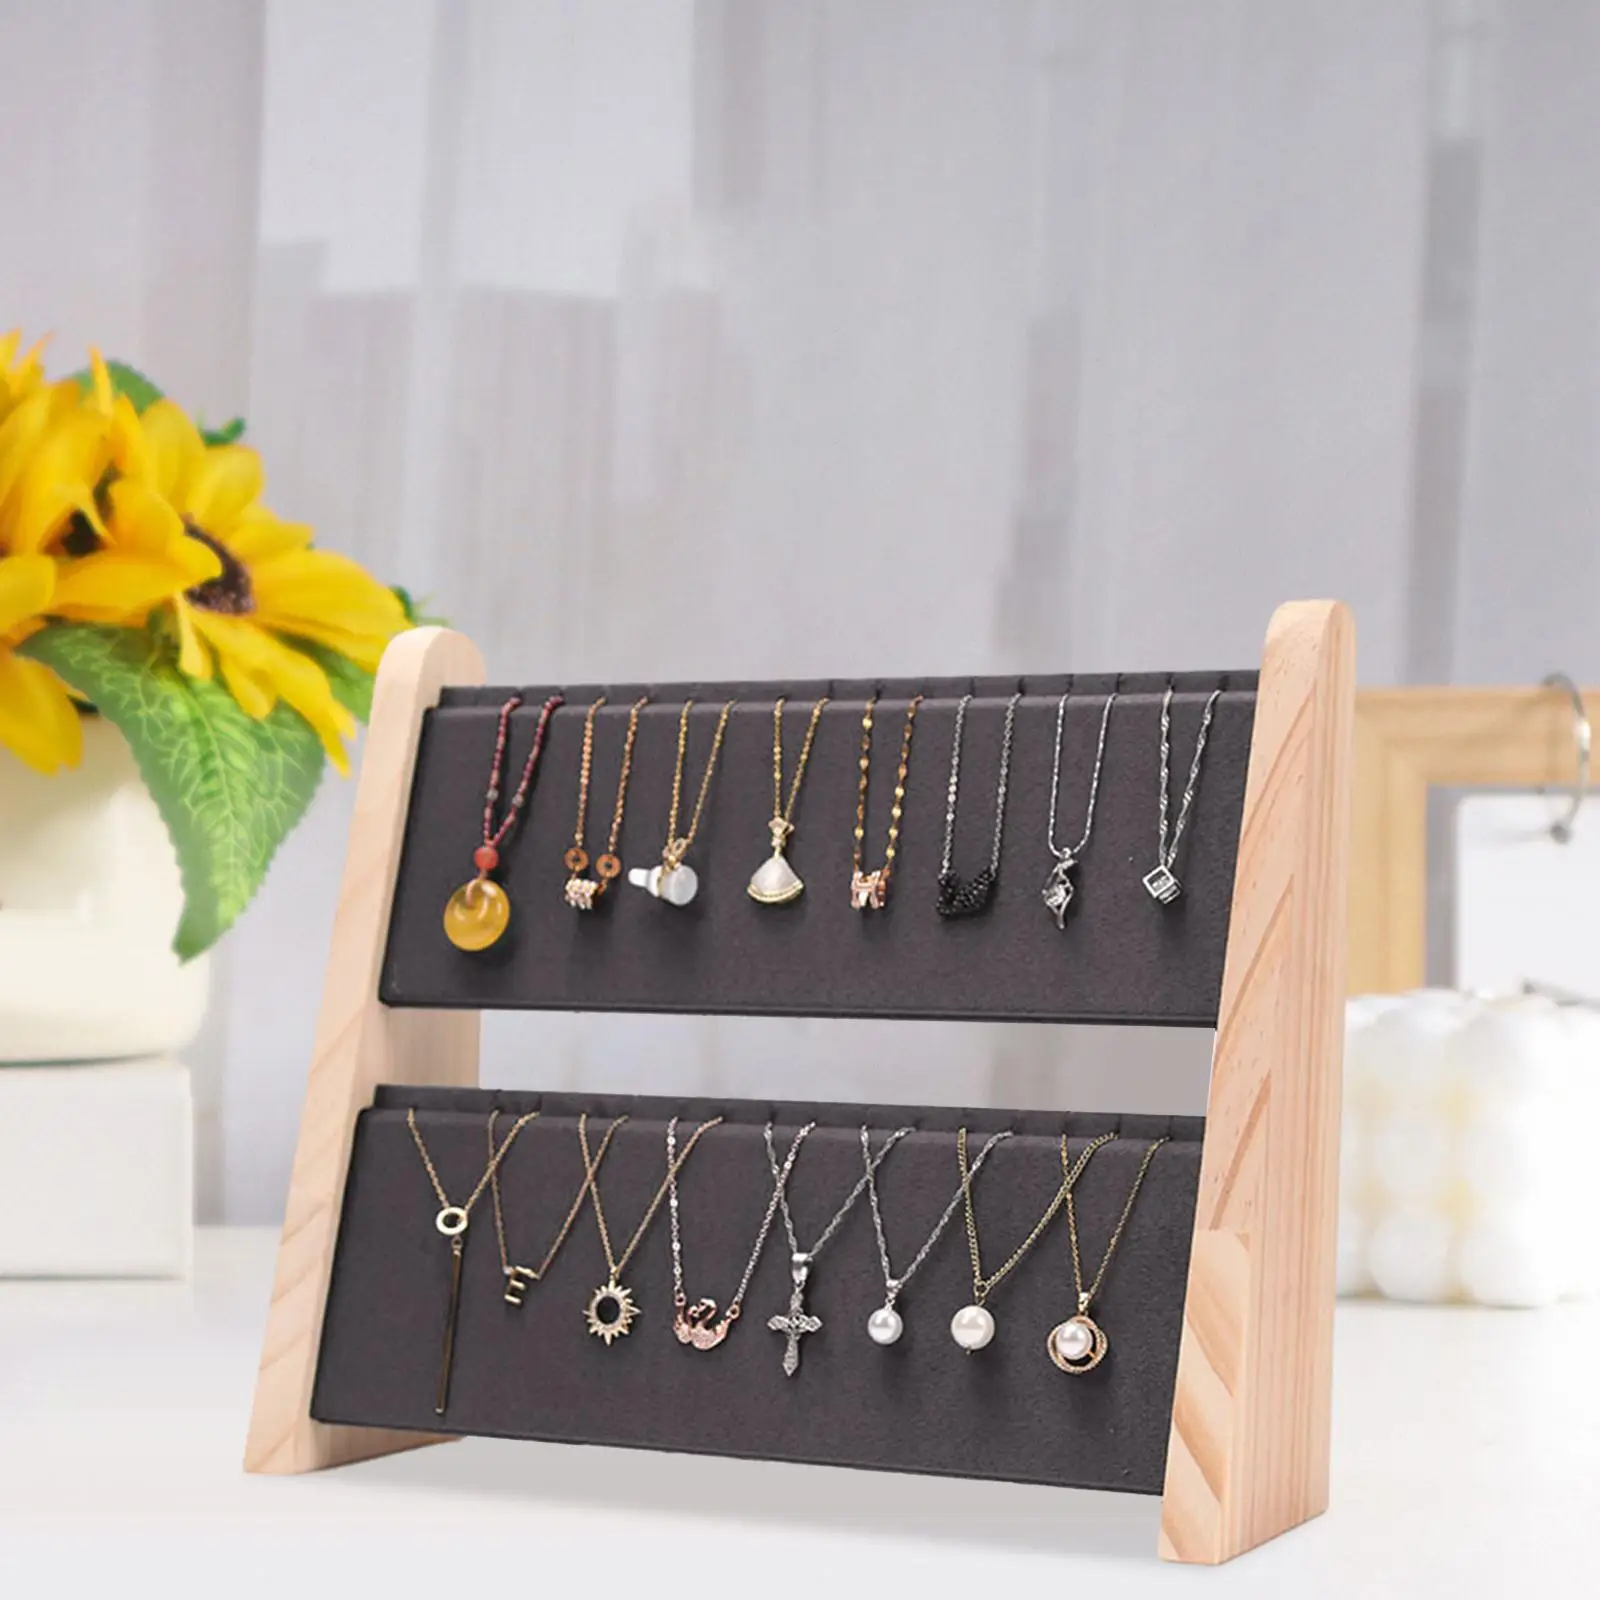 Bracelet Storage Rings Shelves Necklace Organizer Jewelry Display Stand Rack for Selling Tradeshow Bangles Piercings Photography